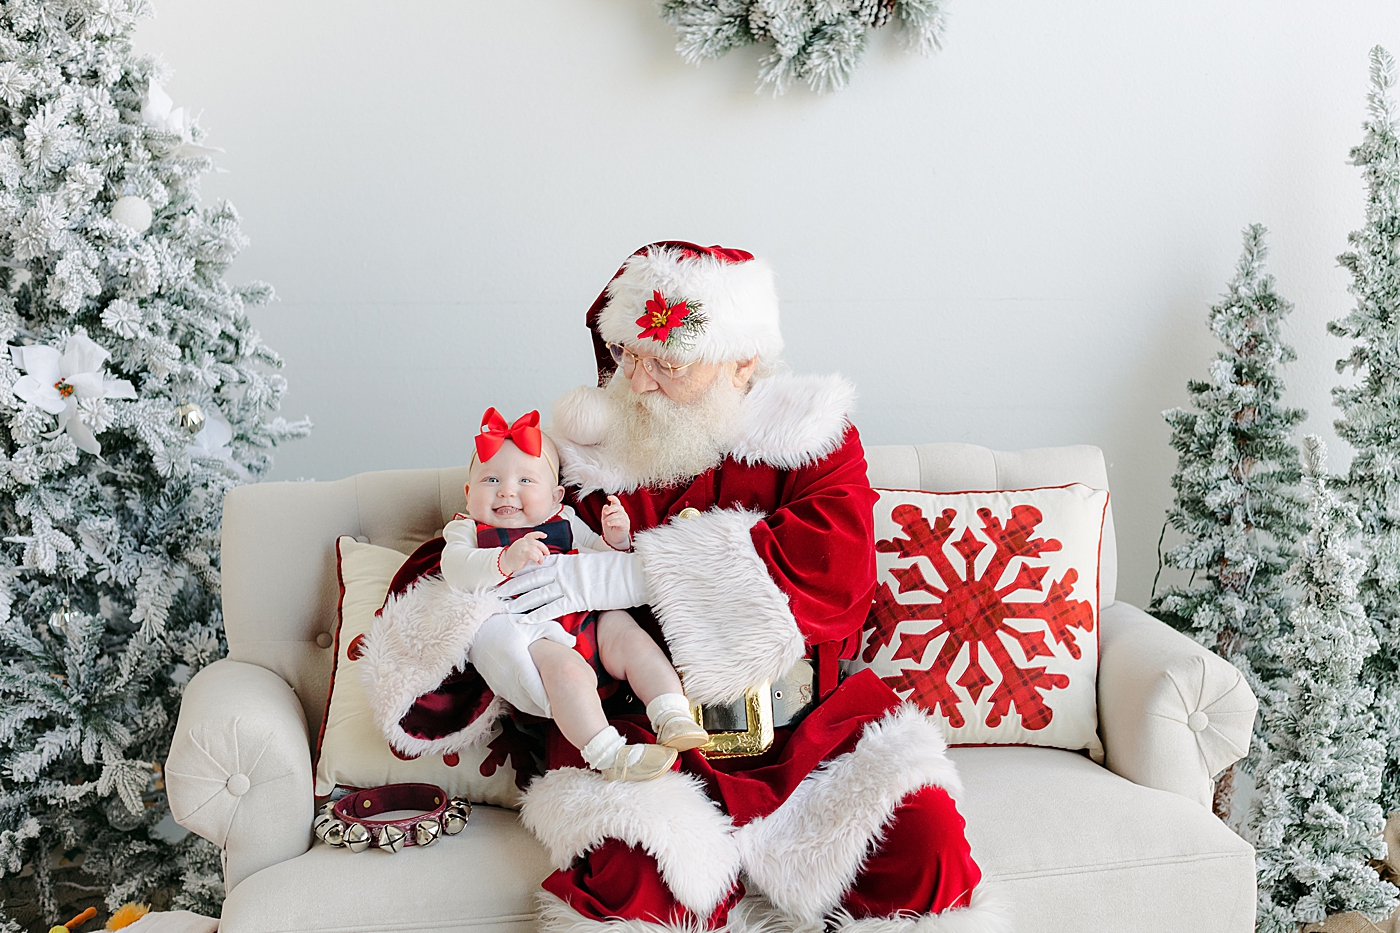 Baby girl in a red bow sitting with Santa | Images by Sana Ahmed Photography